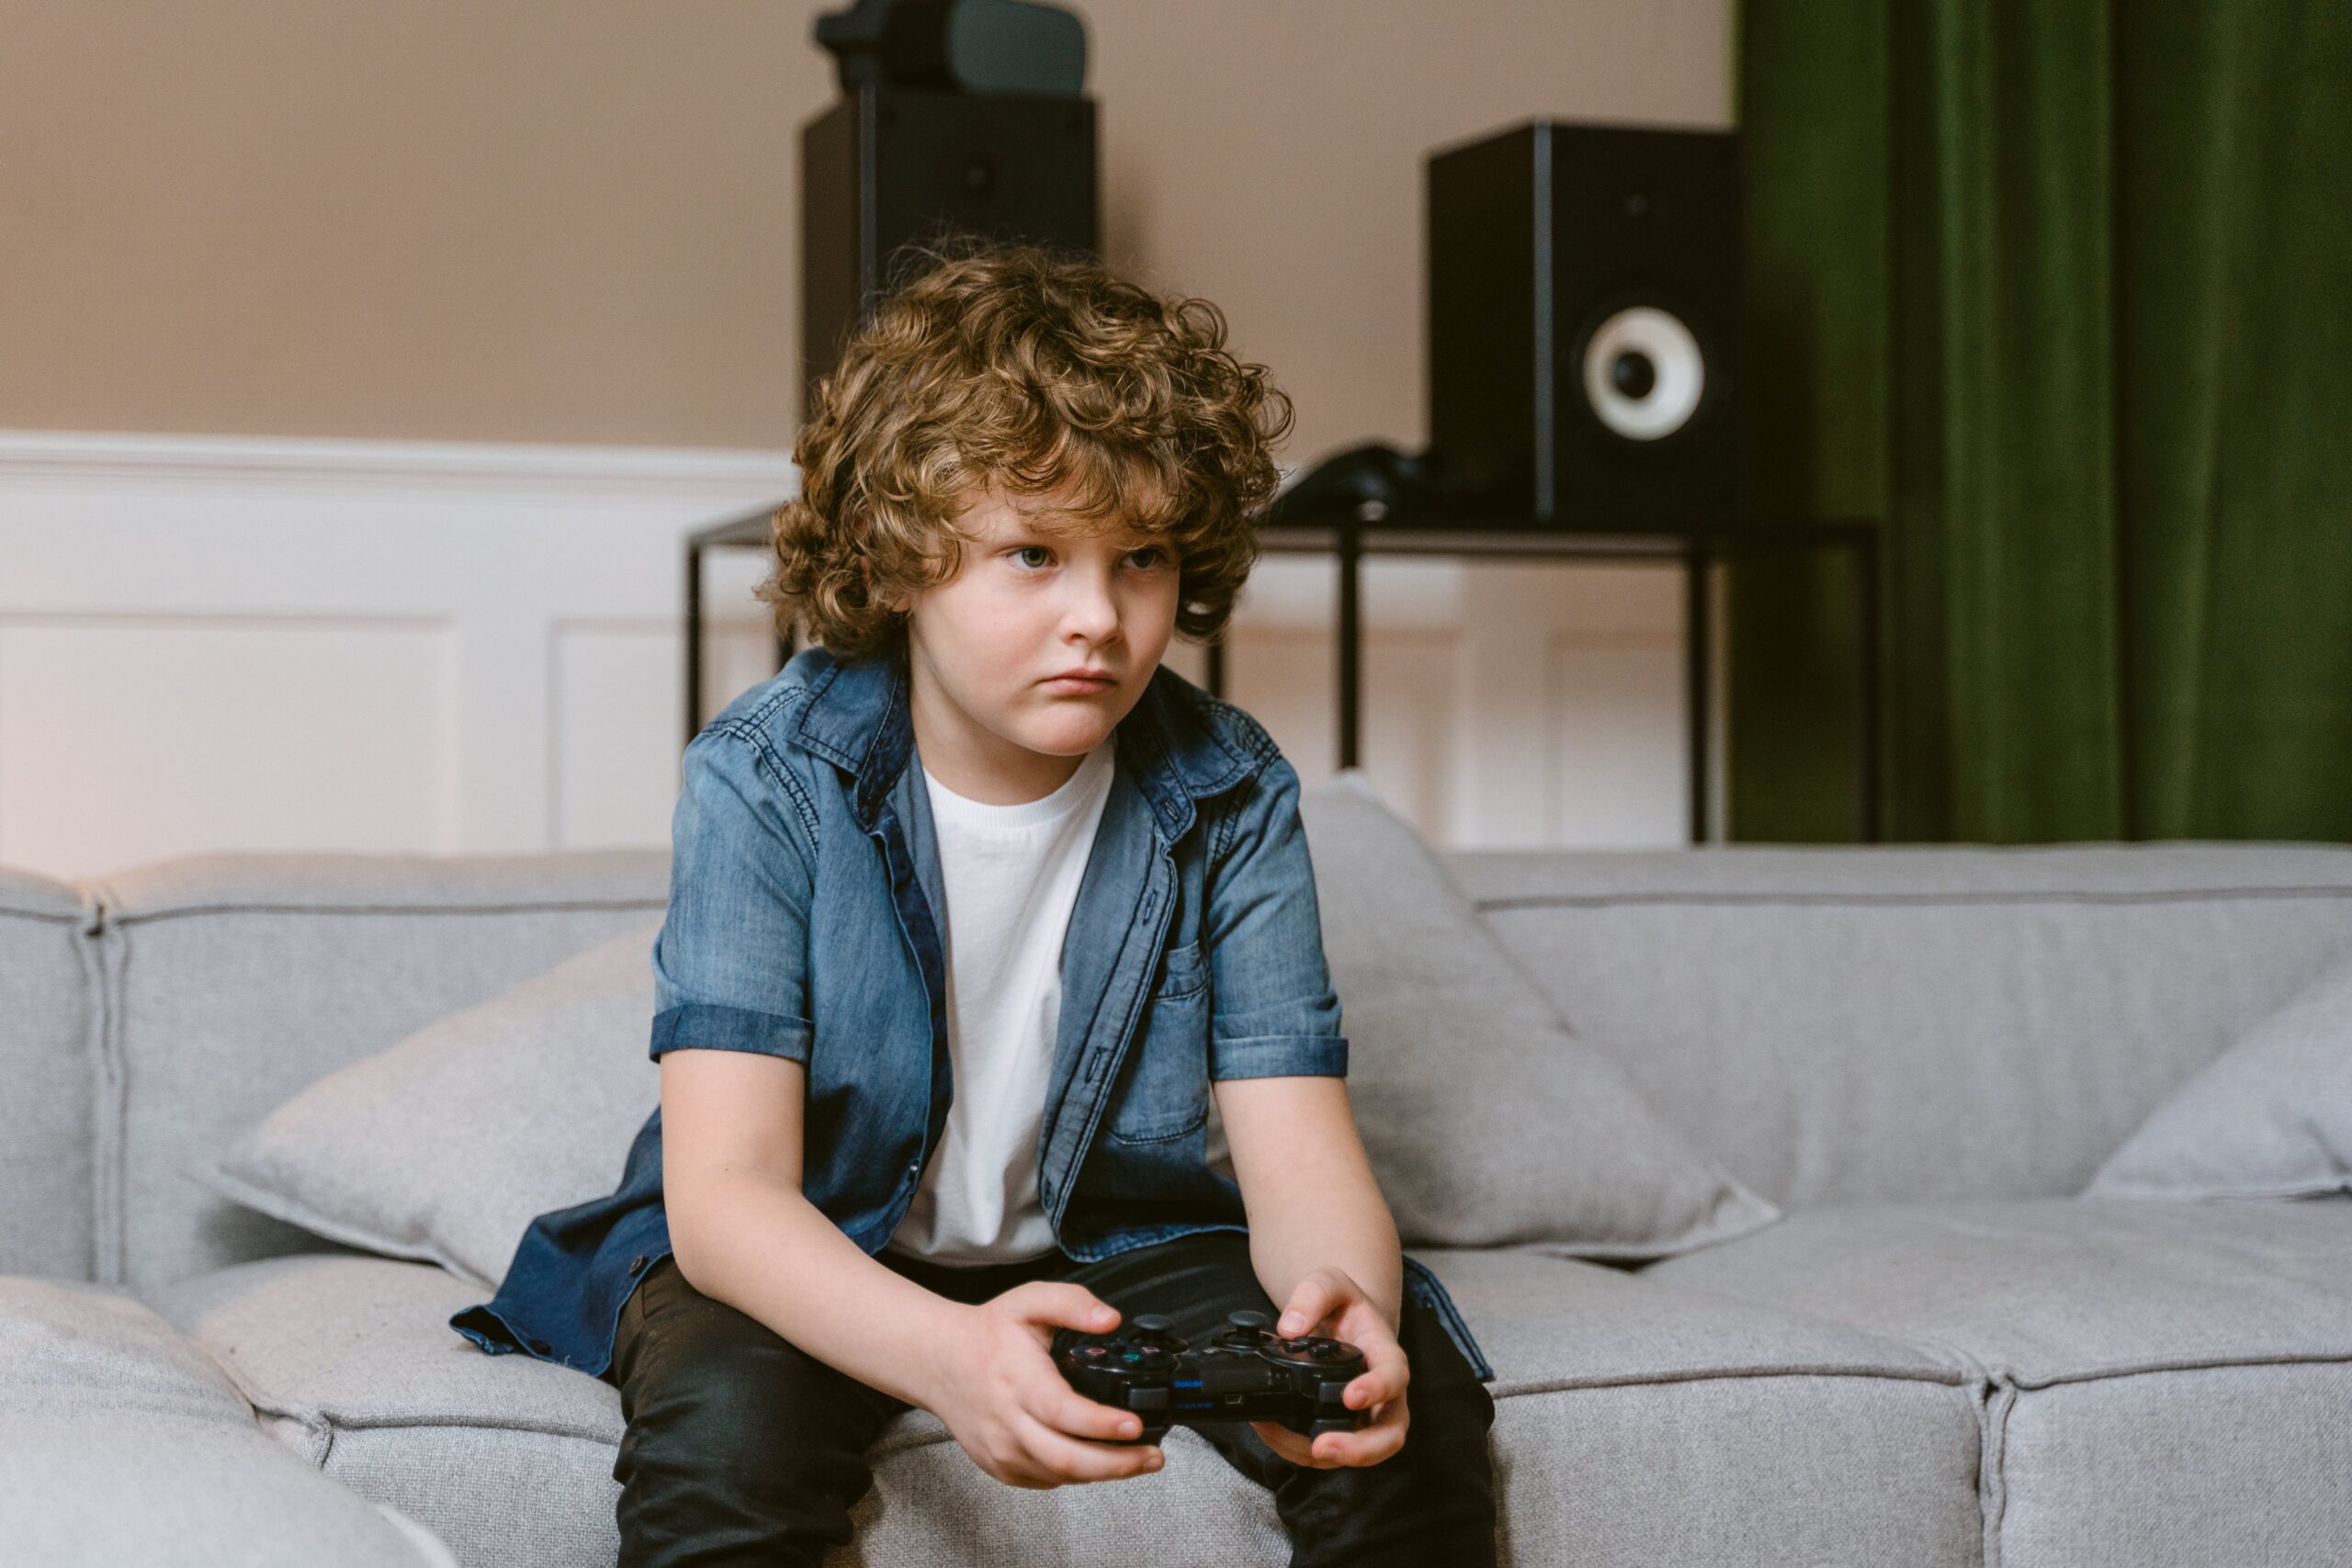 5 of the Best Kid-Friendly Video Games